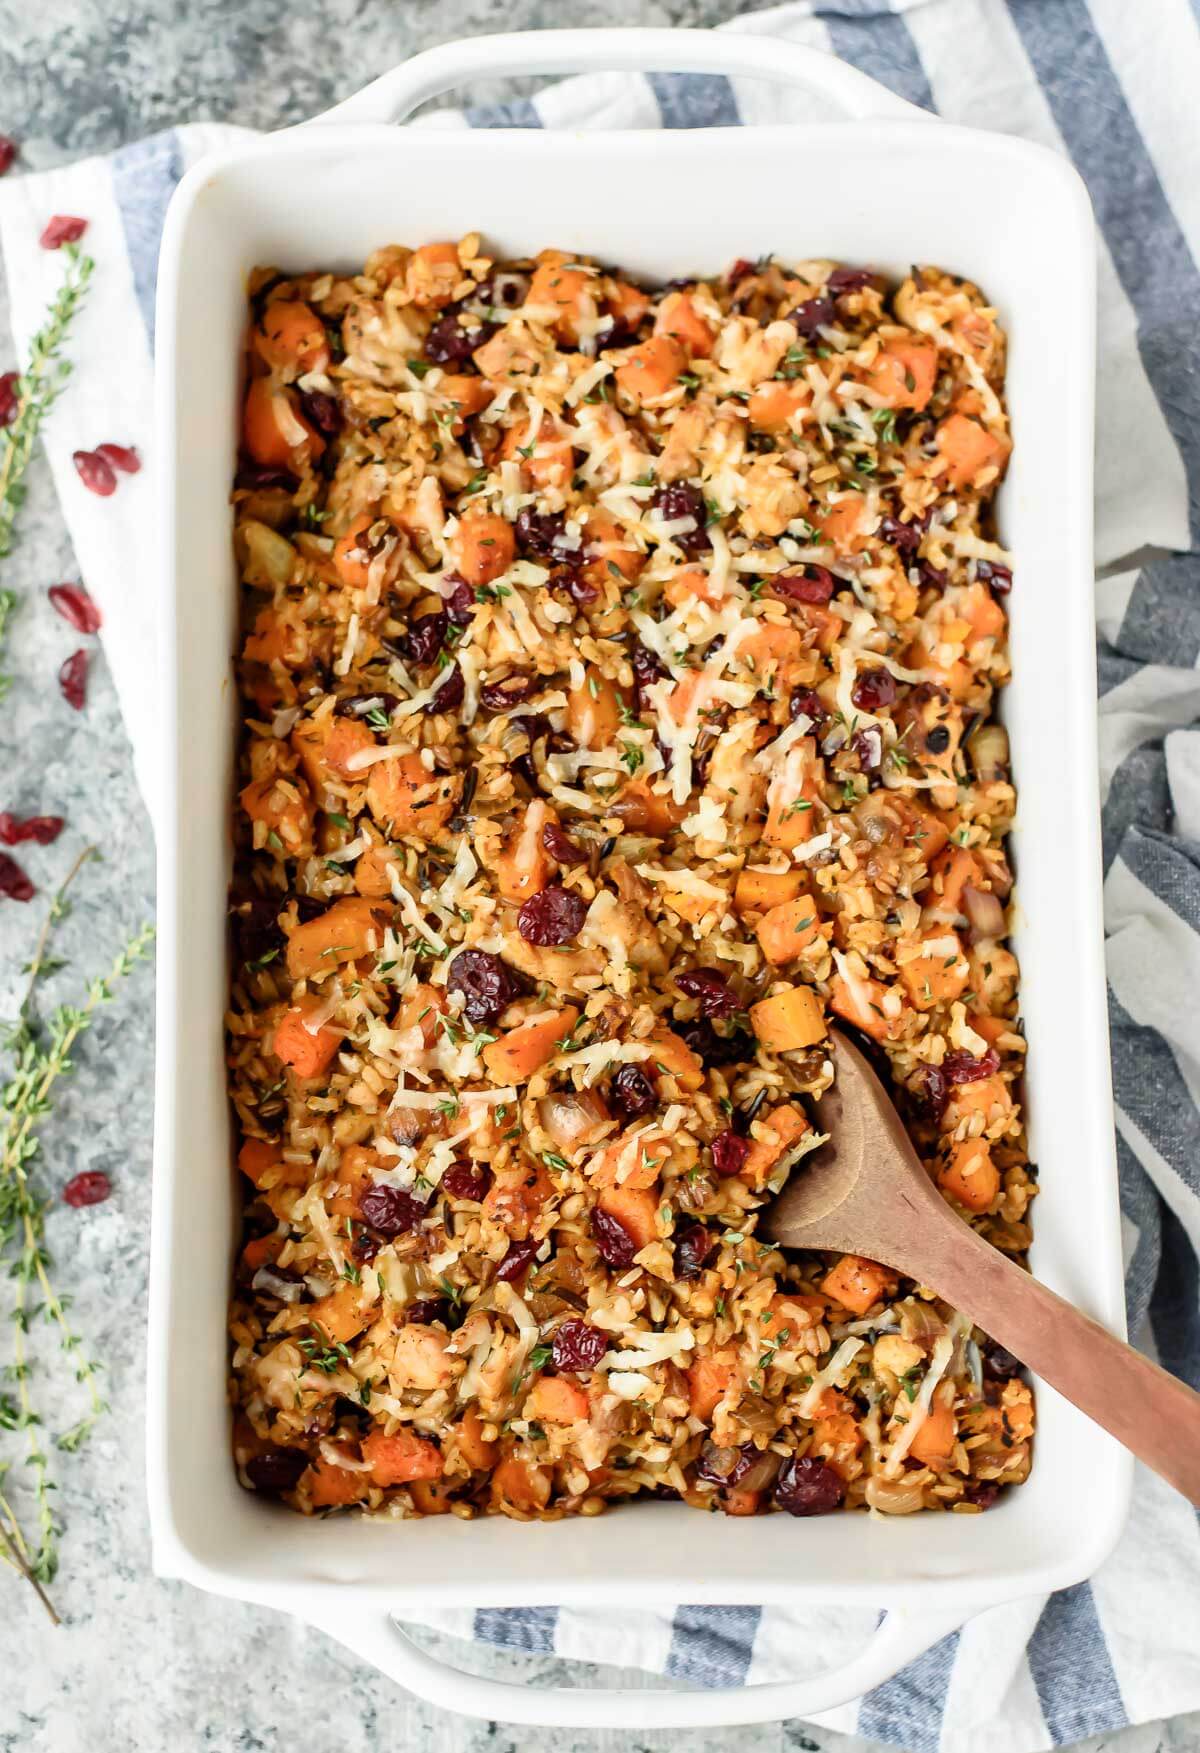 Chicken-and-Wild-Rice-Casserole-Recipe-with-Butternut-Squash-and-Cranberry